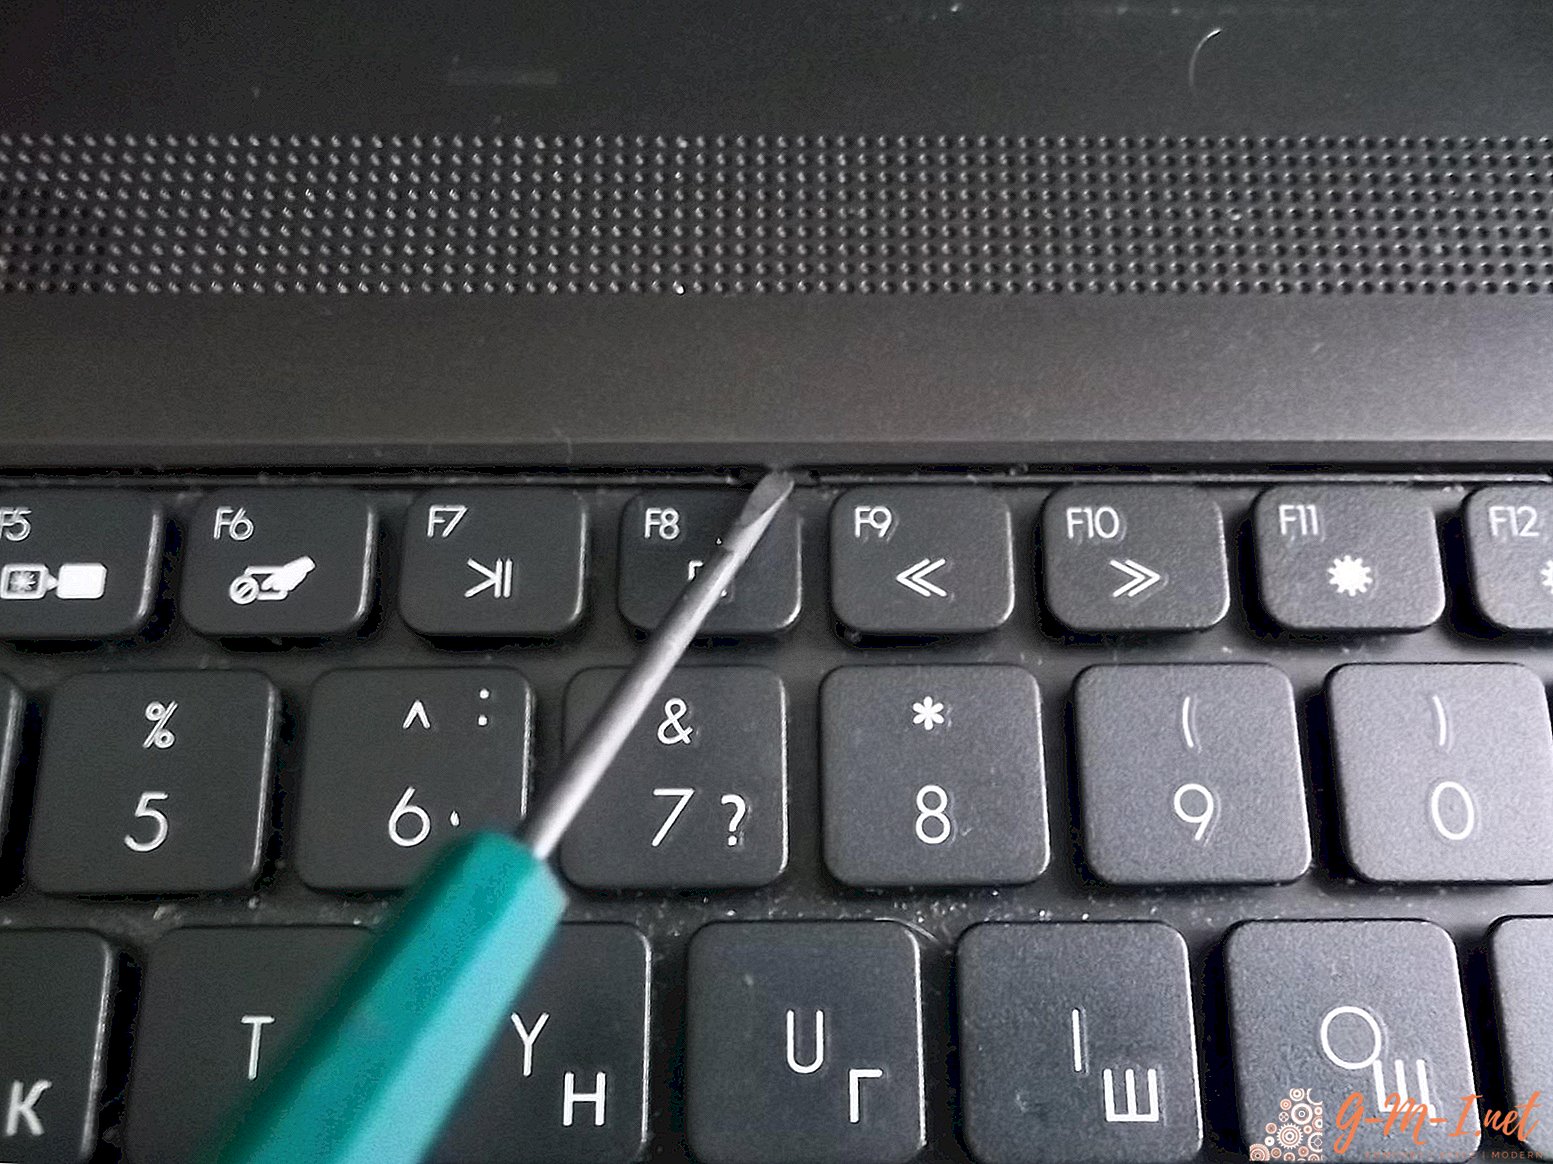 How to remove a keyboard from a laptop